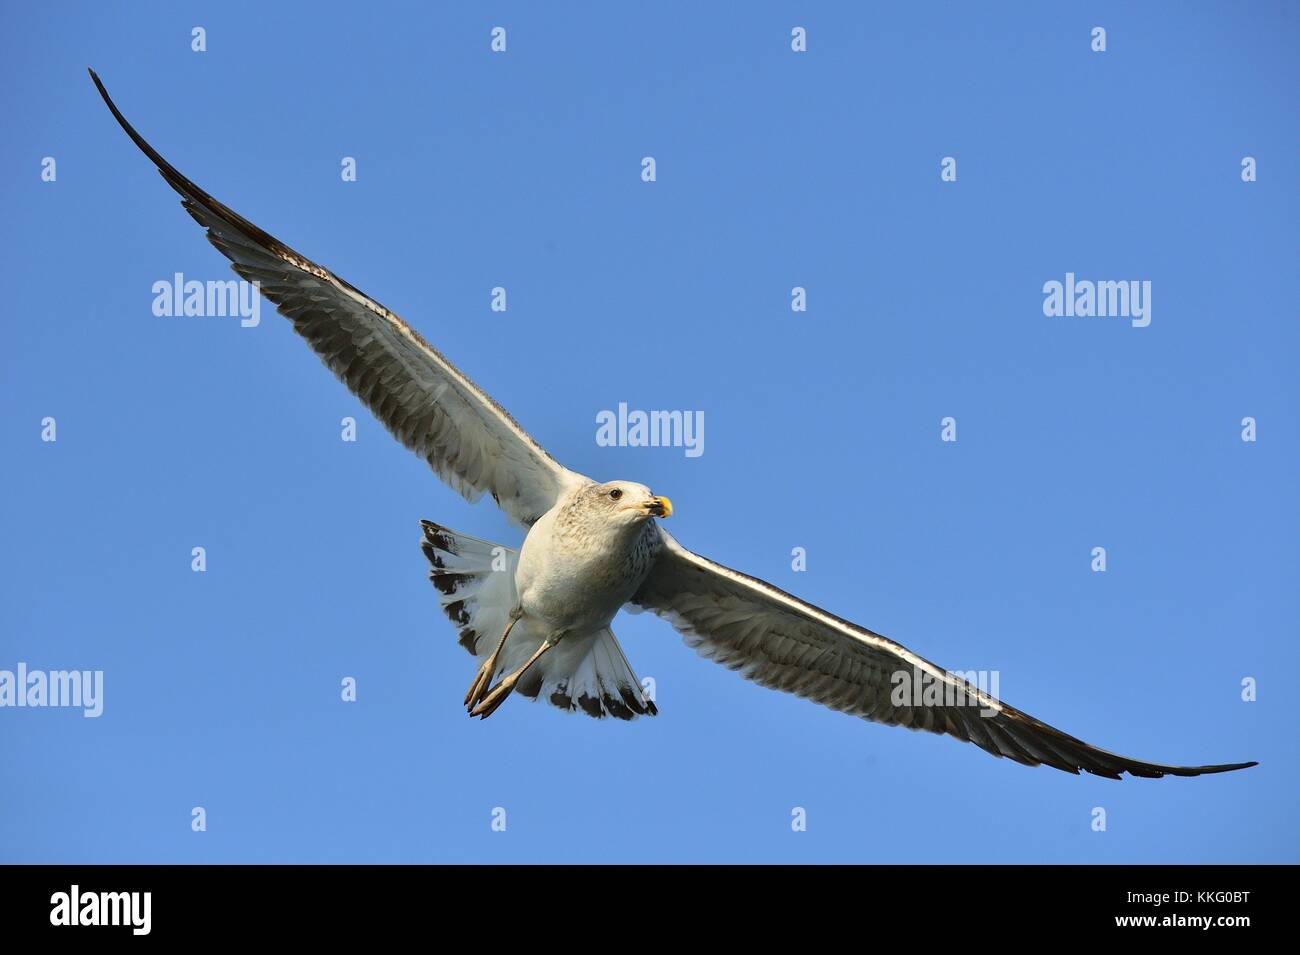 Bird in flight. Natural blue sky background. Flying Juvenile Kelp gull (Larus dominicanus), also known as the Dominican gull and Black Backed Kelp Gul Stock Photo